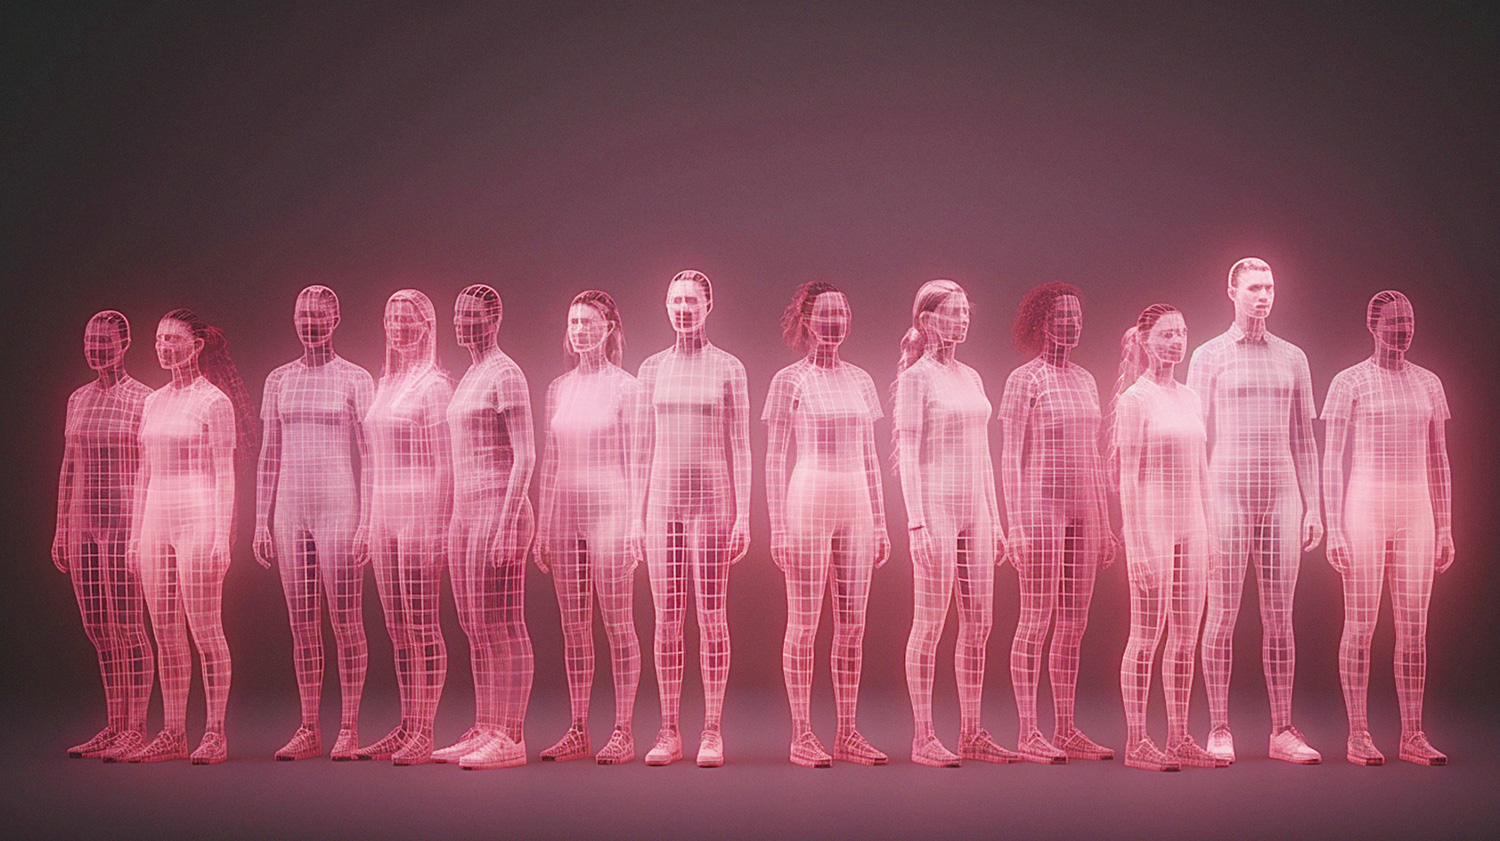 row of people undergoing body scan show by having grids projected onto them